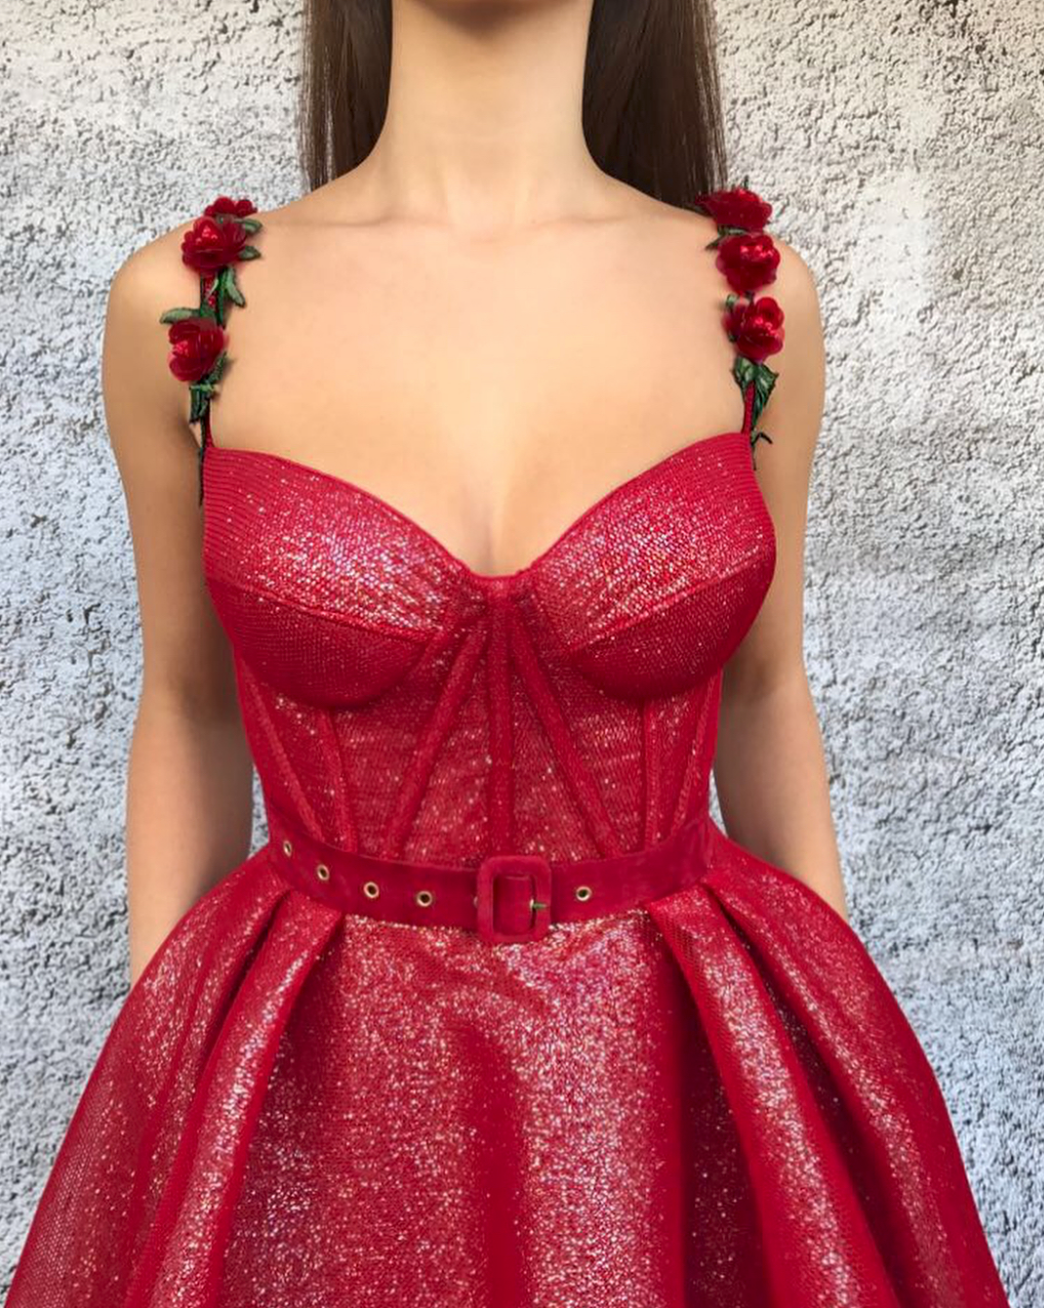 Red A-Line dress with spaghetti straps and embroidery